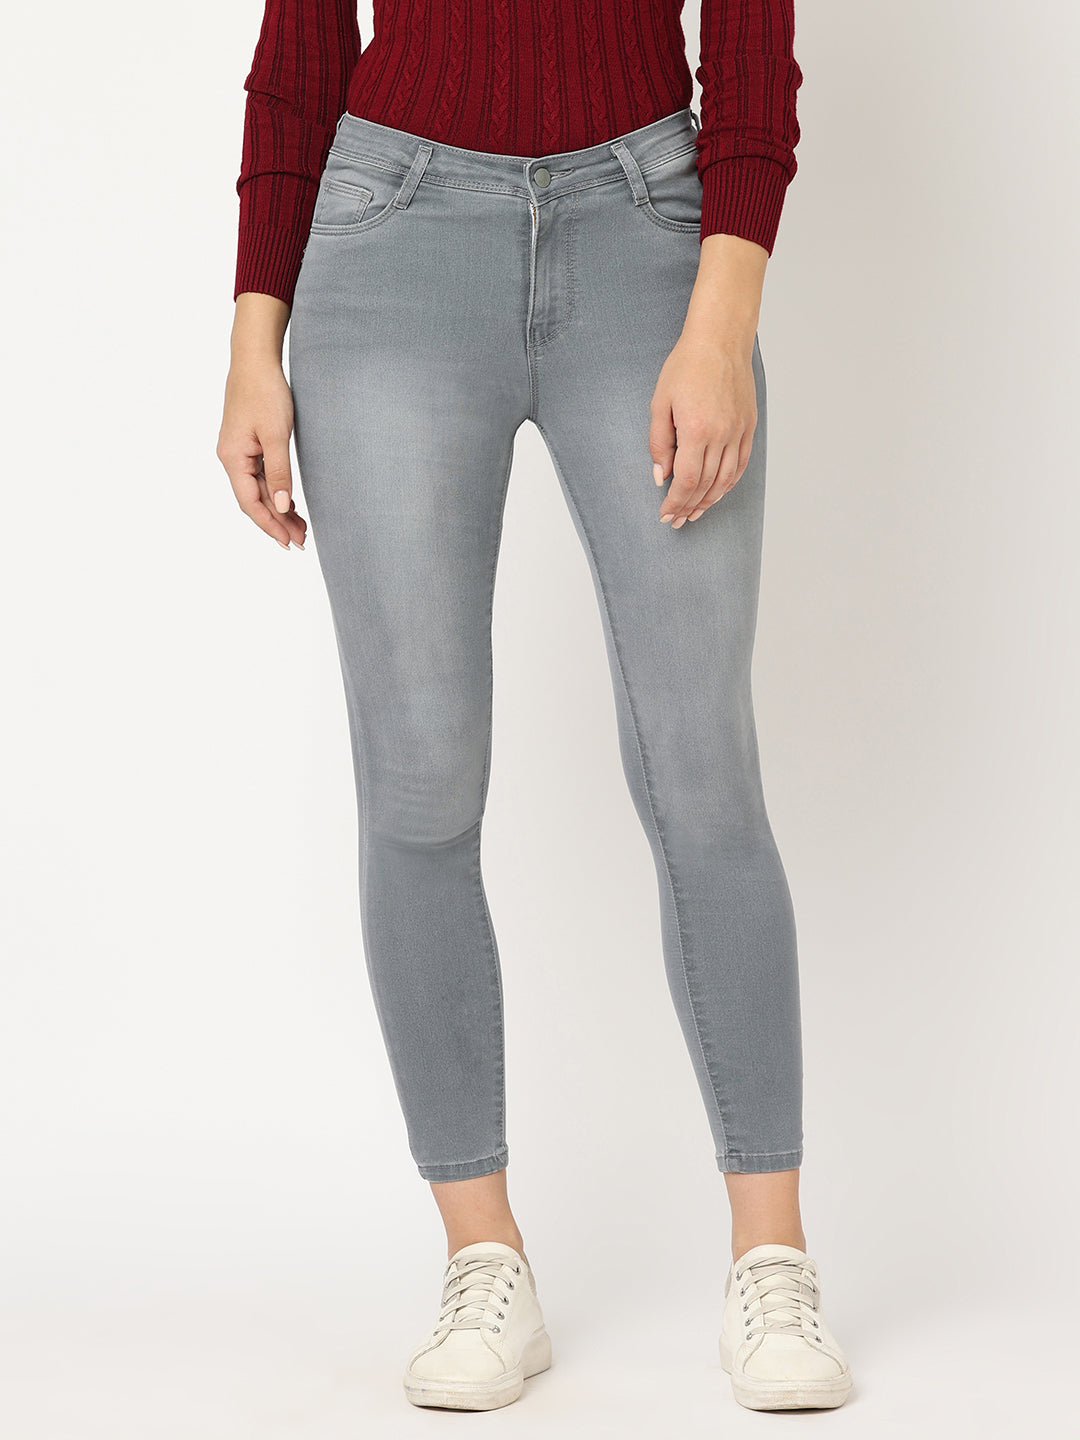 Women High-Rise Skinny Fit Grey Jeans